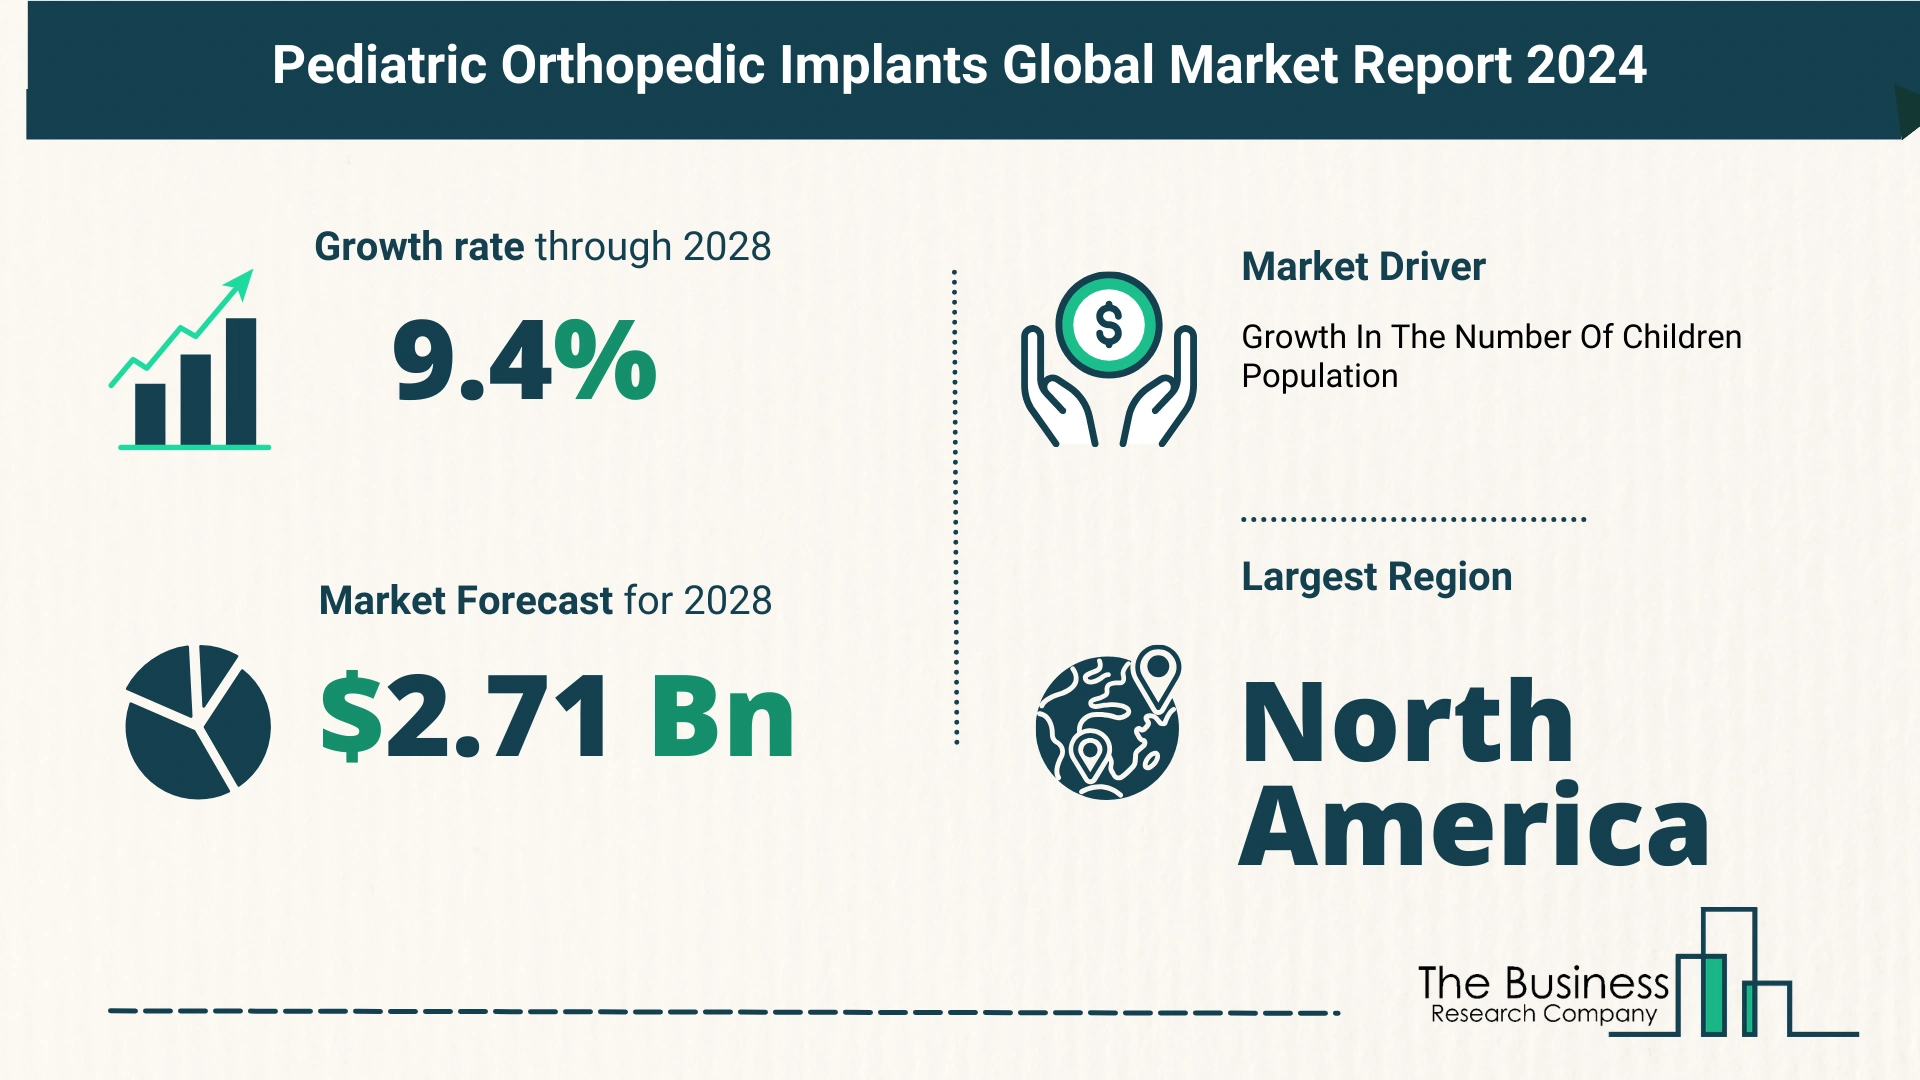 Overview Of The Pediatric Orthopedic Implants Market 2024: Size, Drivers, And Trends